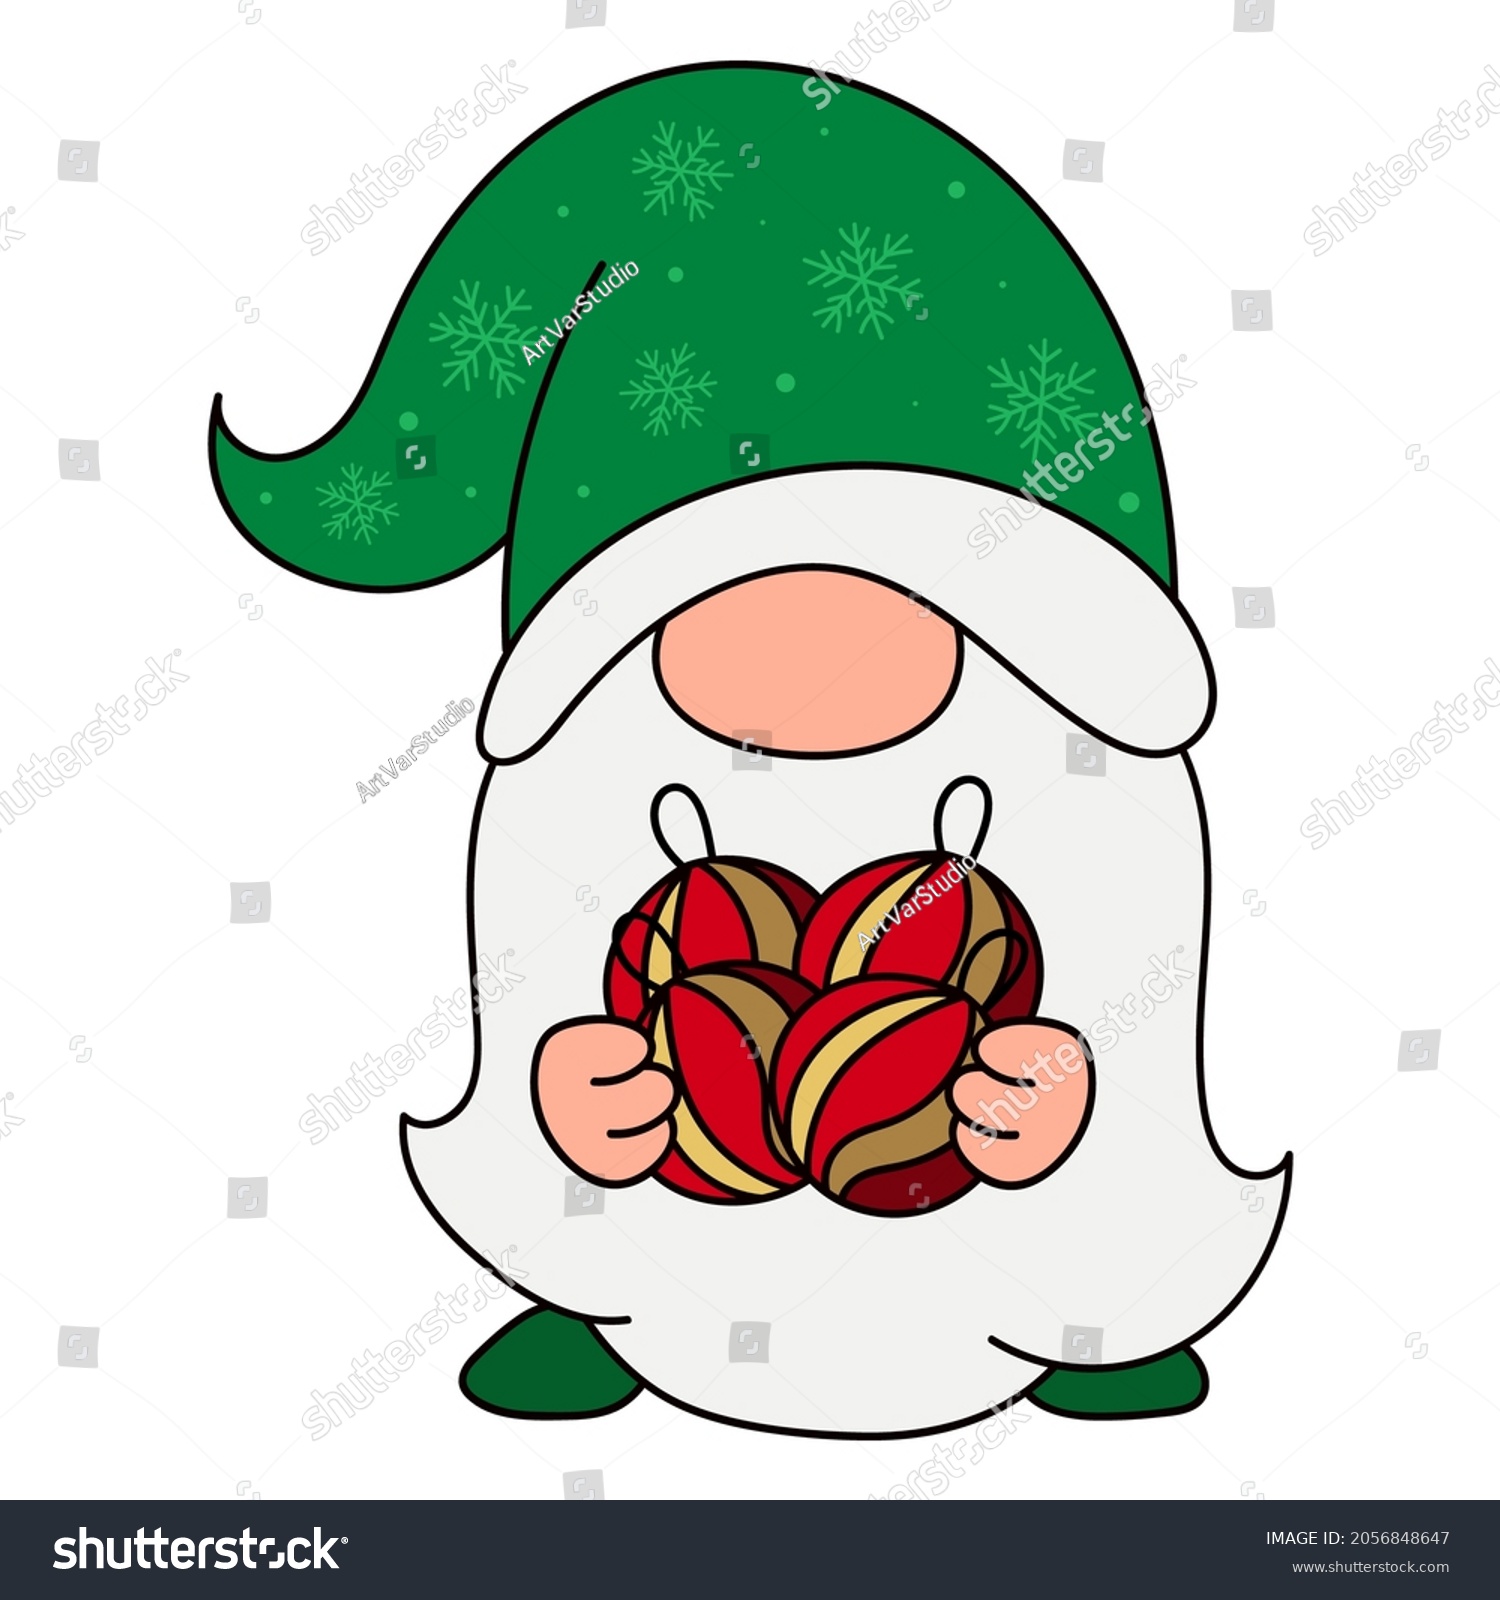 SVG of Gnome illustration. Christmas gnome clipart. Cute Vector Christmas illustration. Vector illustration of baby Xmas gnome for nursery room decor, posters, greeting cards and party invitations. svg